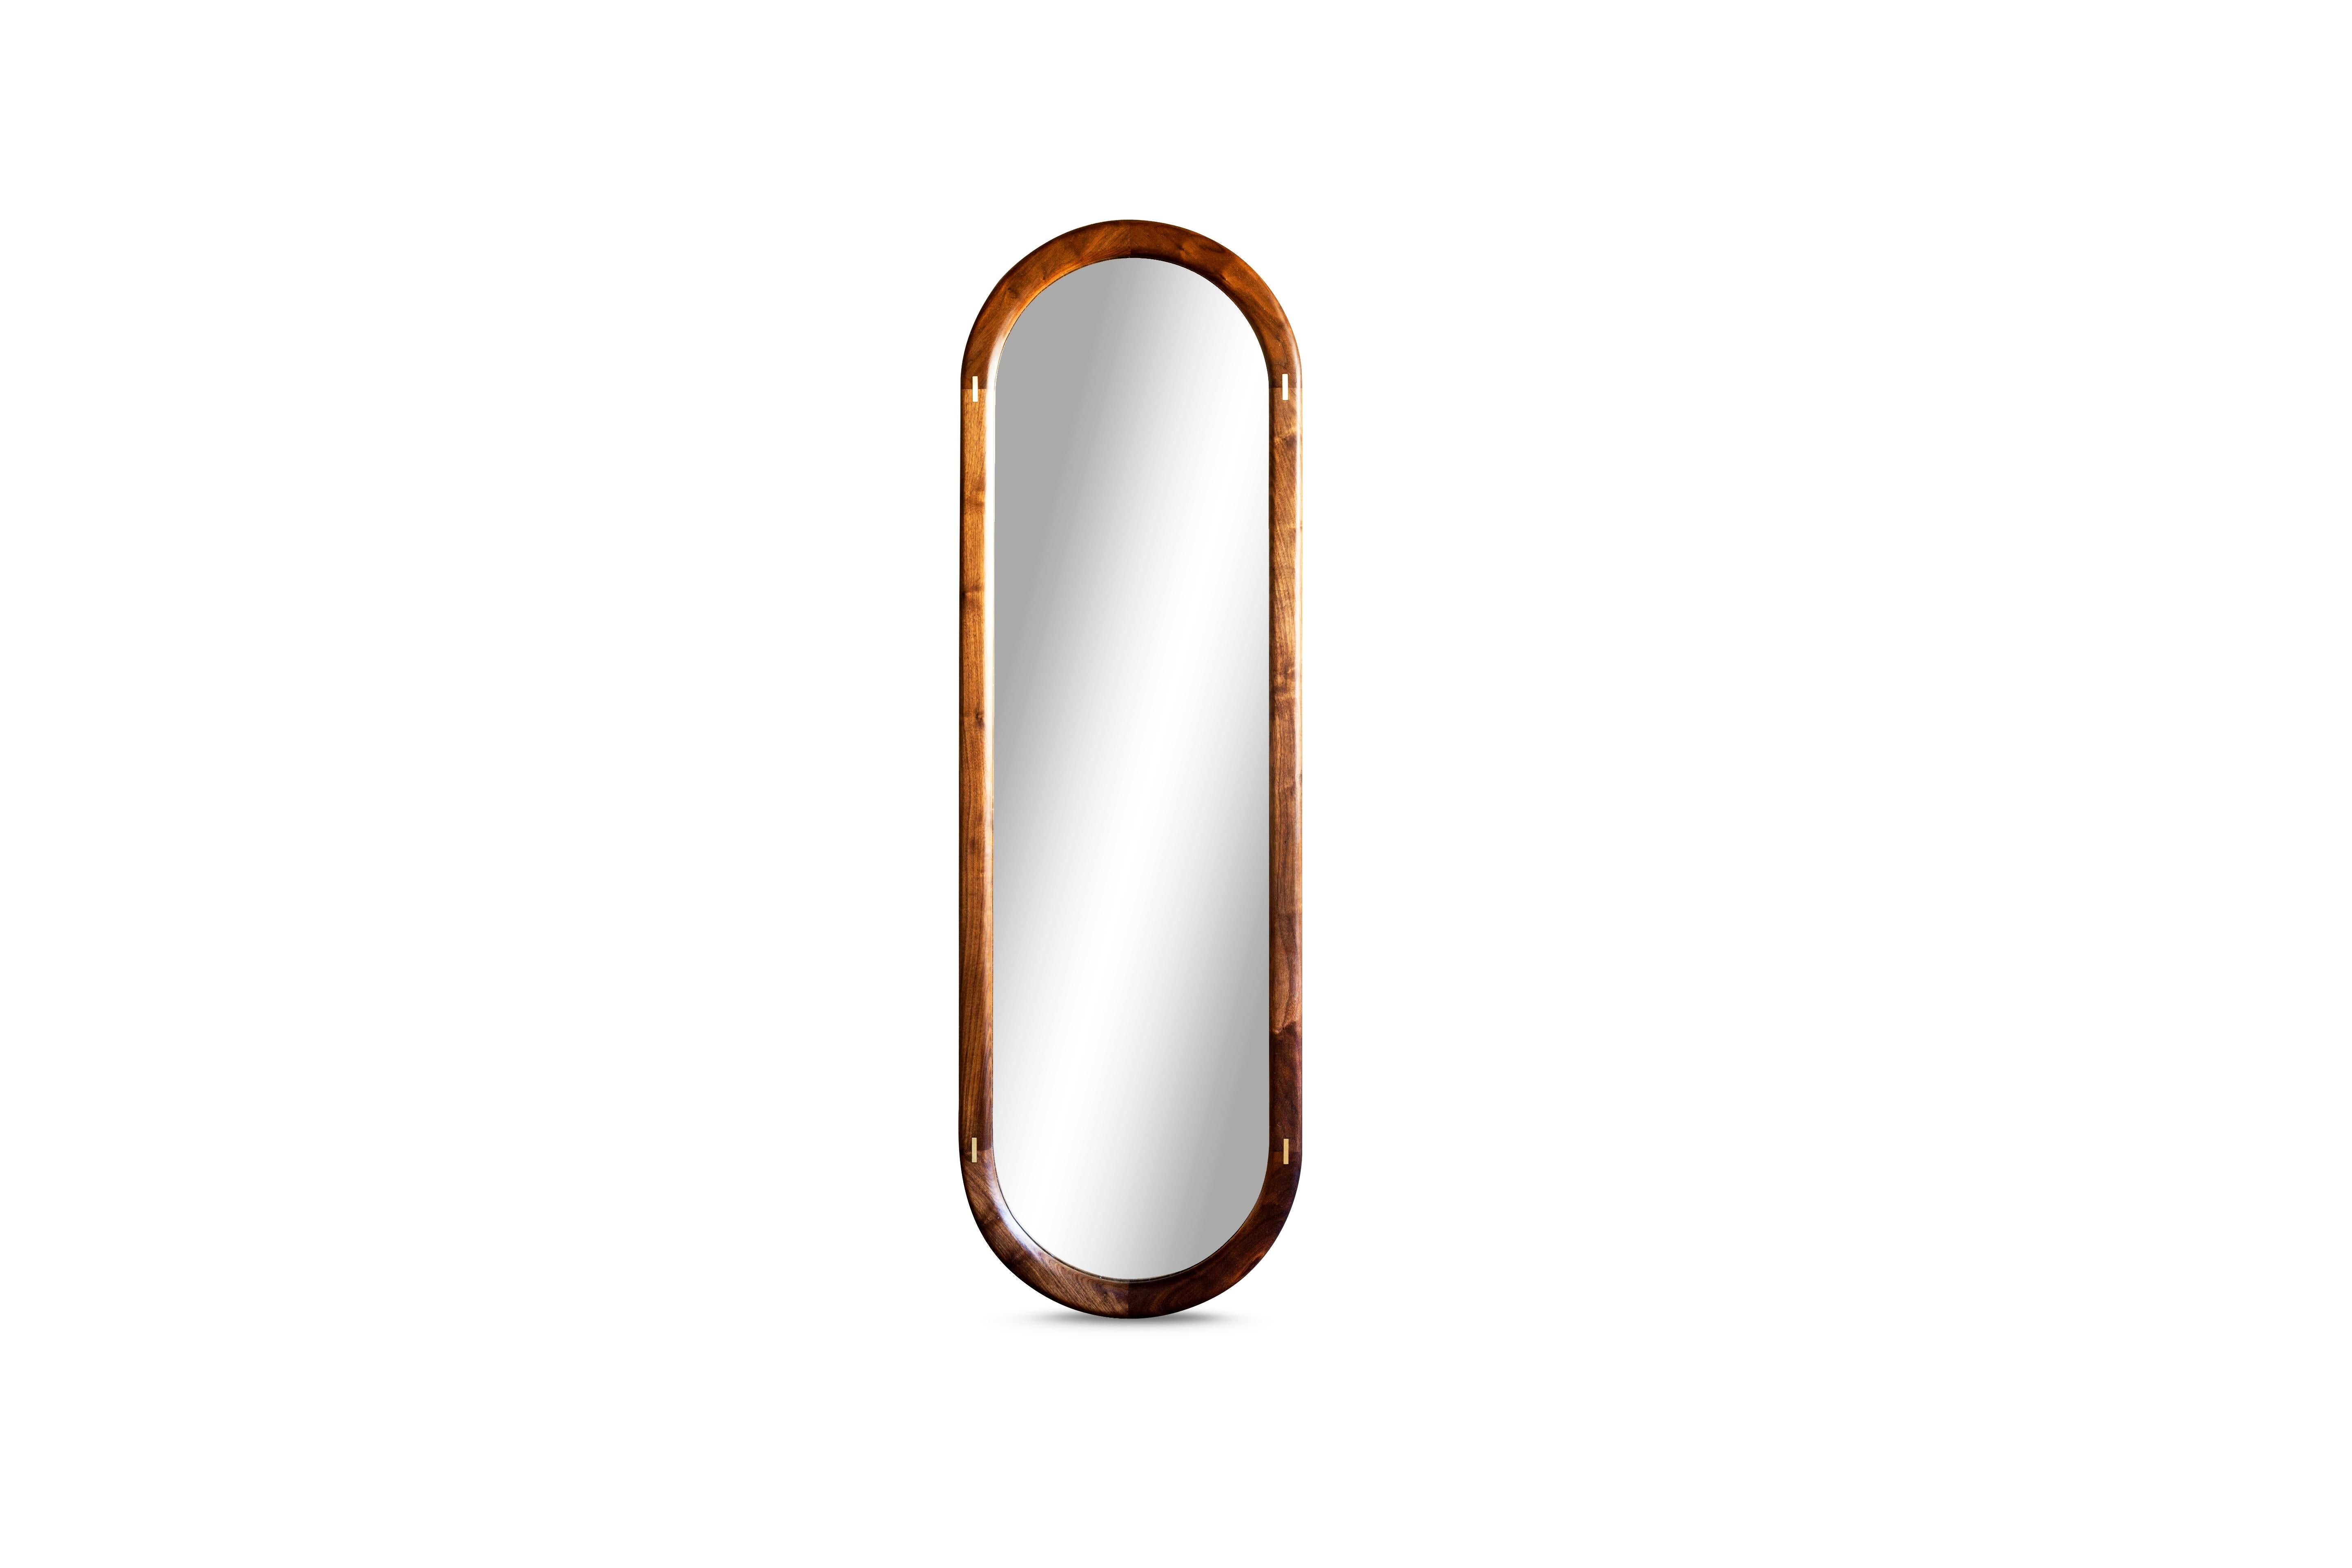 Solid wood constructed pill shaped mirror with true metal inlay detailing.
This mirror is shown in walnut with a brass inlay.

We are currently making these in two sizes:
20” W x 64” H x 2” D
30” W x 40” H x 2” D.

 